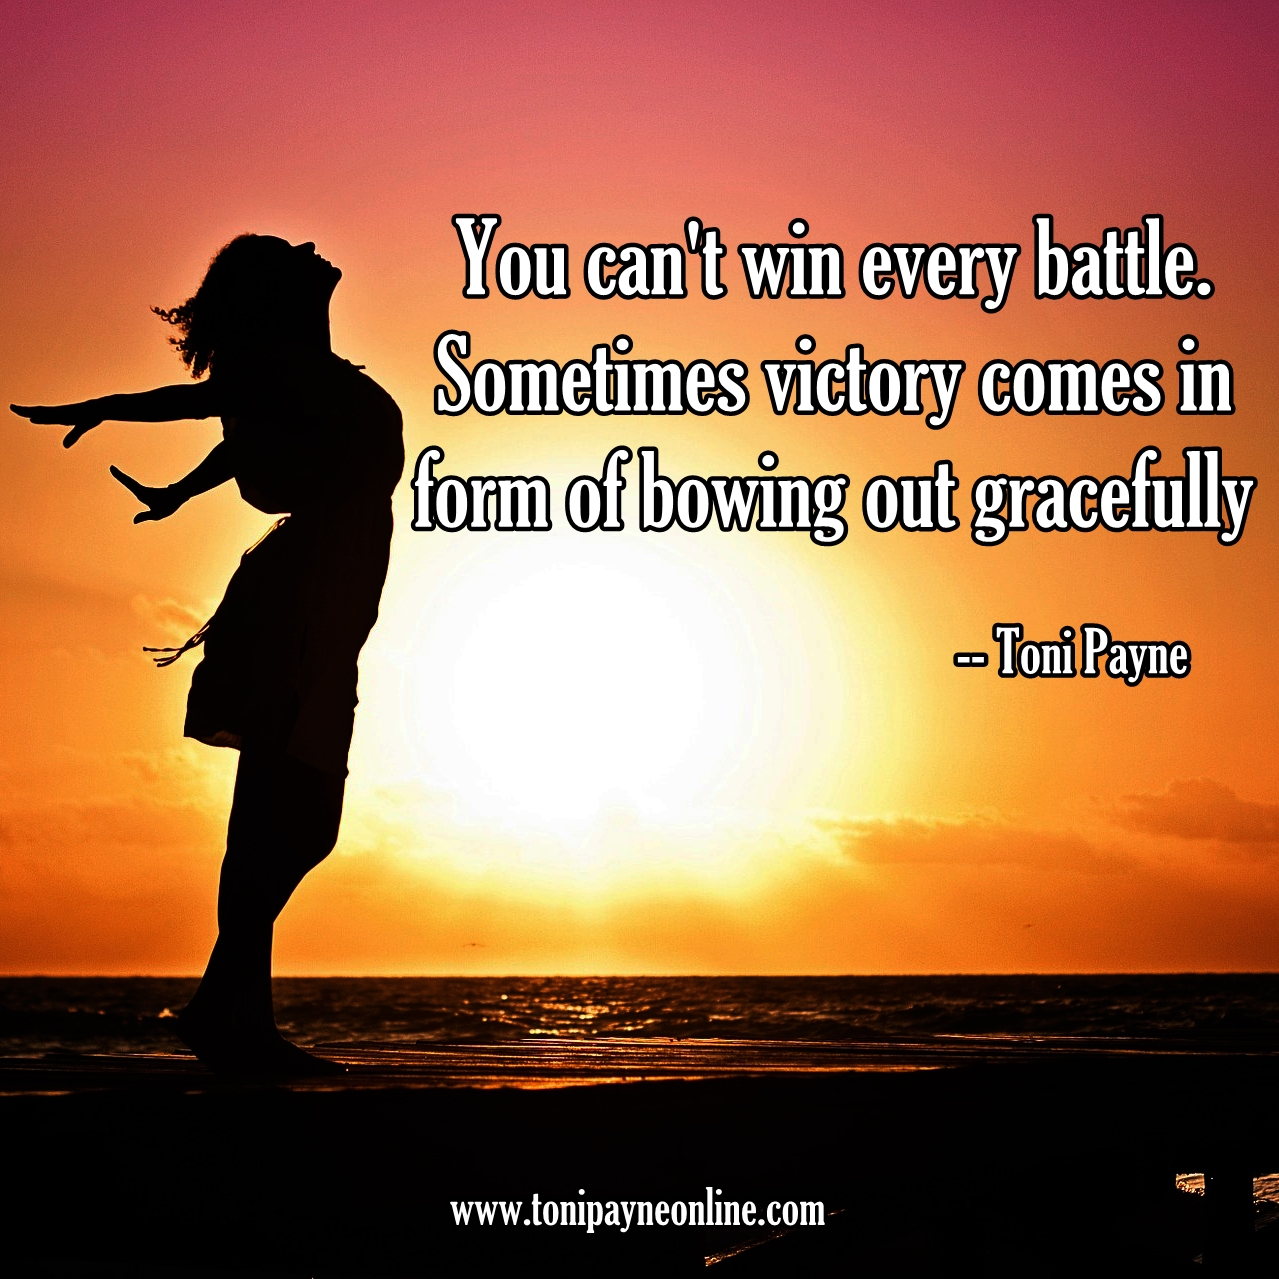 Quote about Winning Gracefully